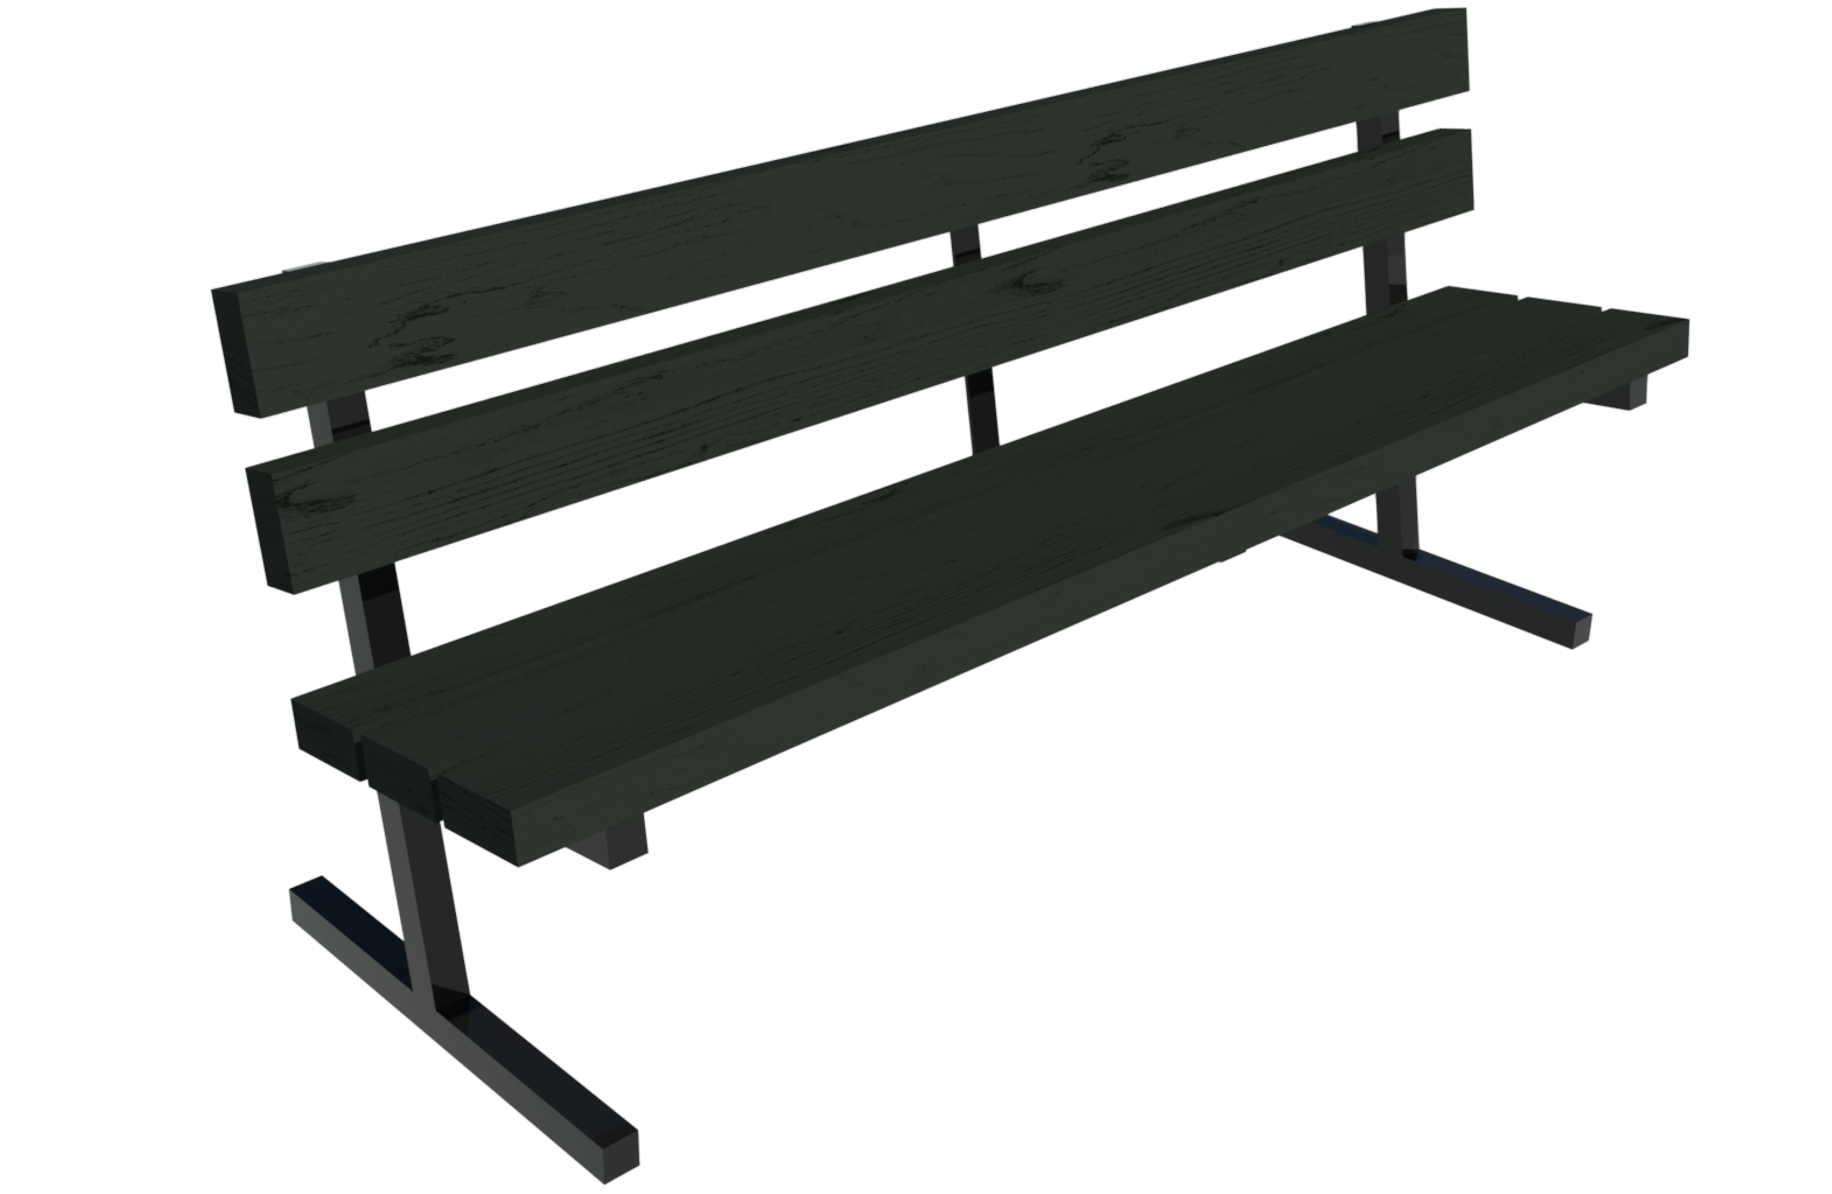 Revit render showing recycled plastic bench.